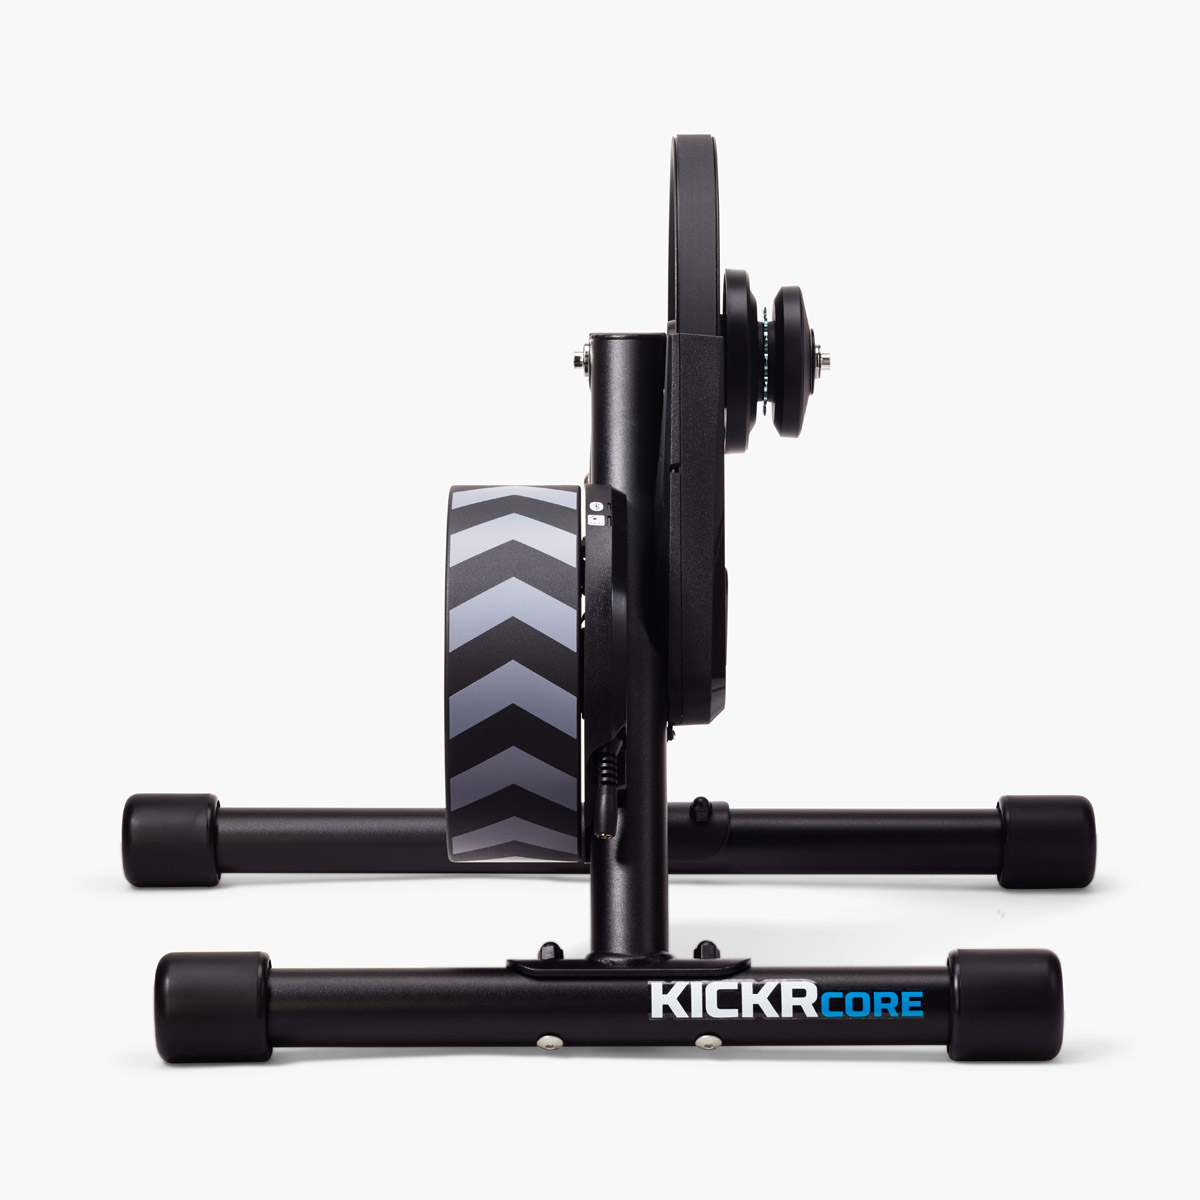 Wahoo KICKR CORE Zwift One Now Shipping to Canada | Zwift Insider